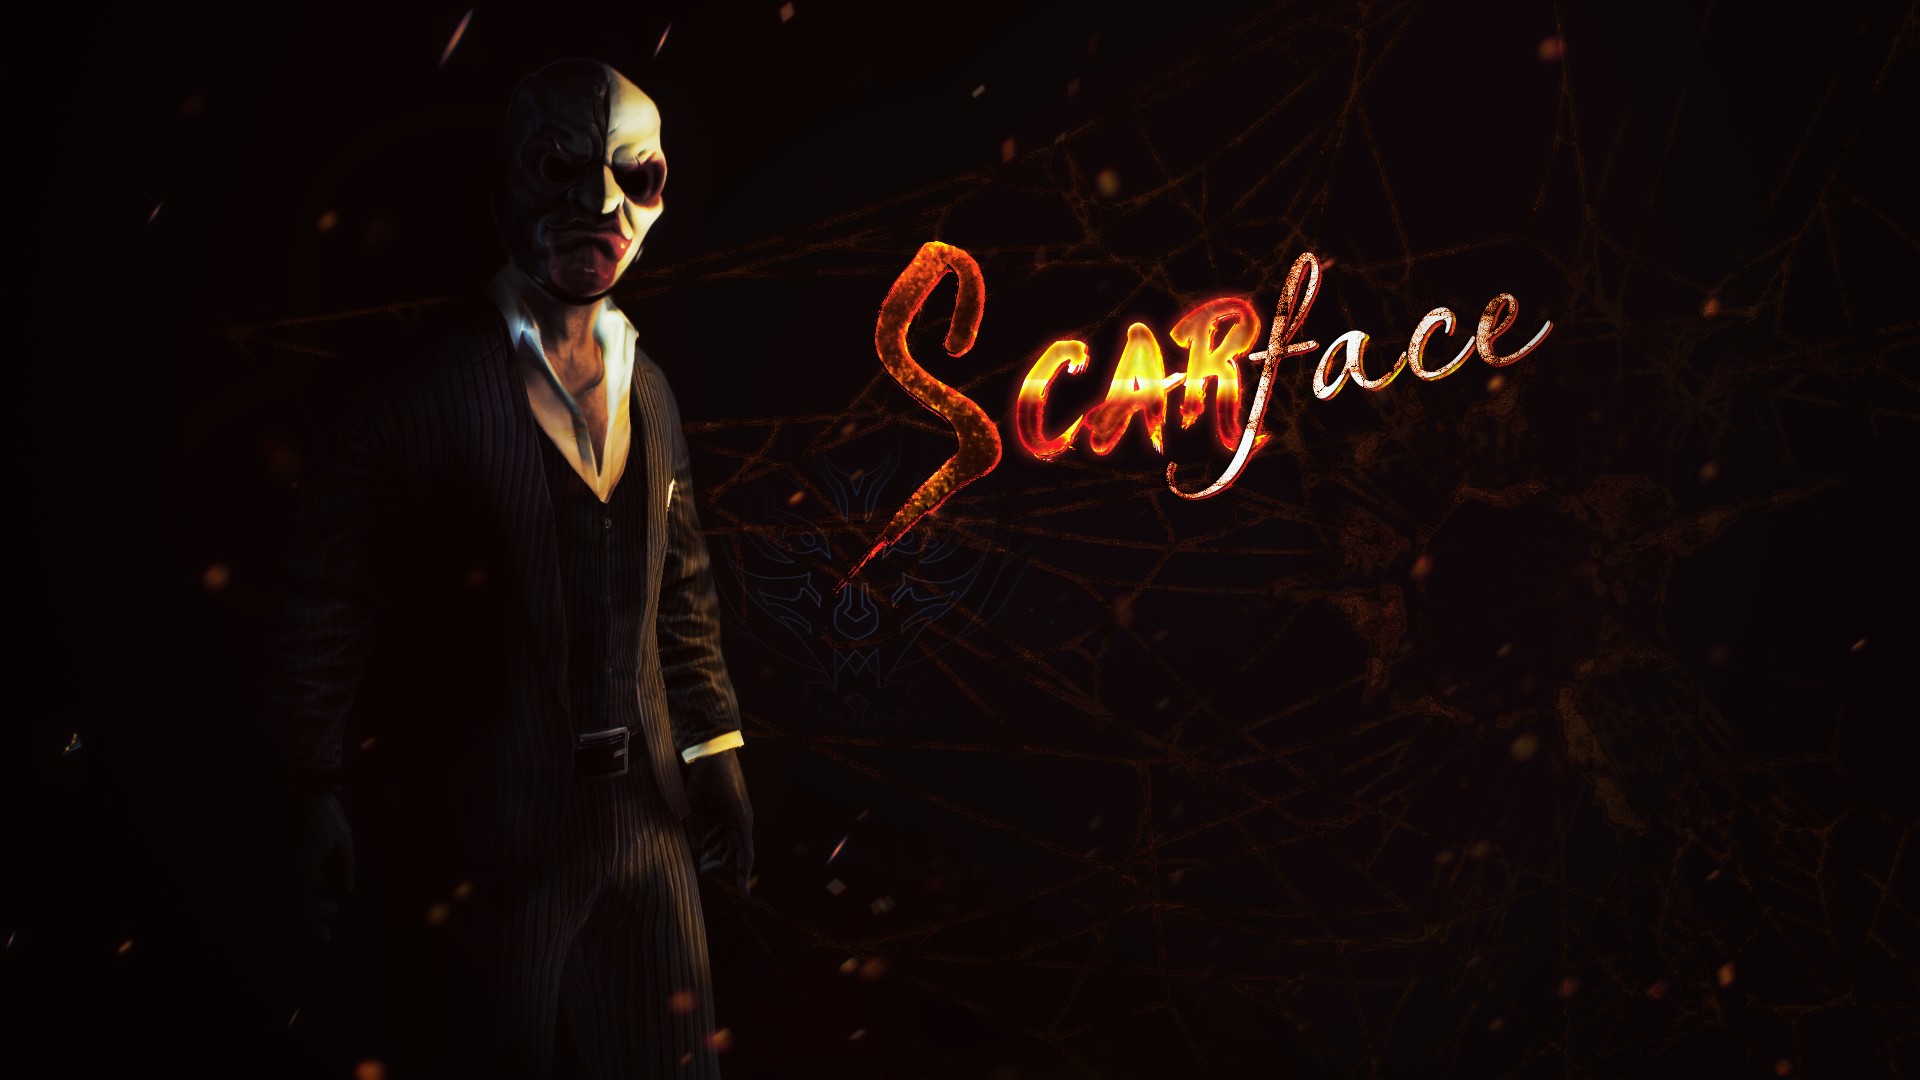 payday 2 scarface download